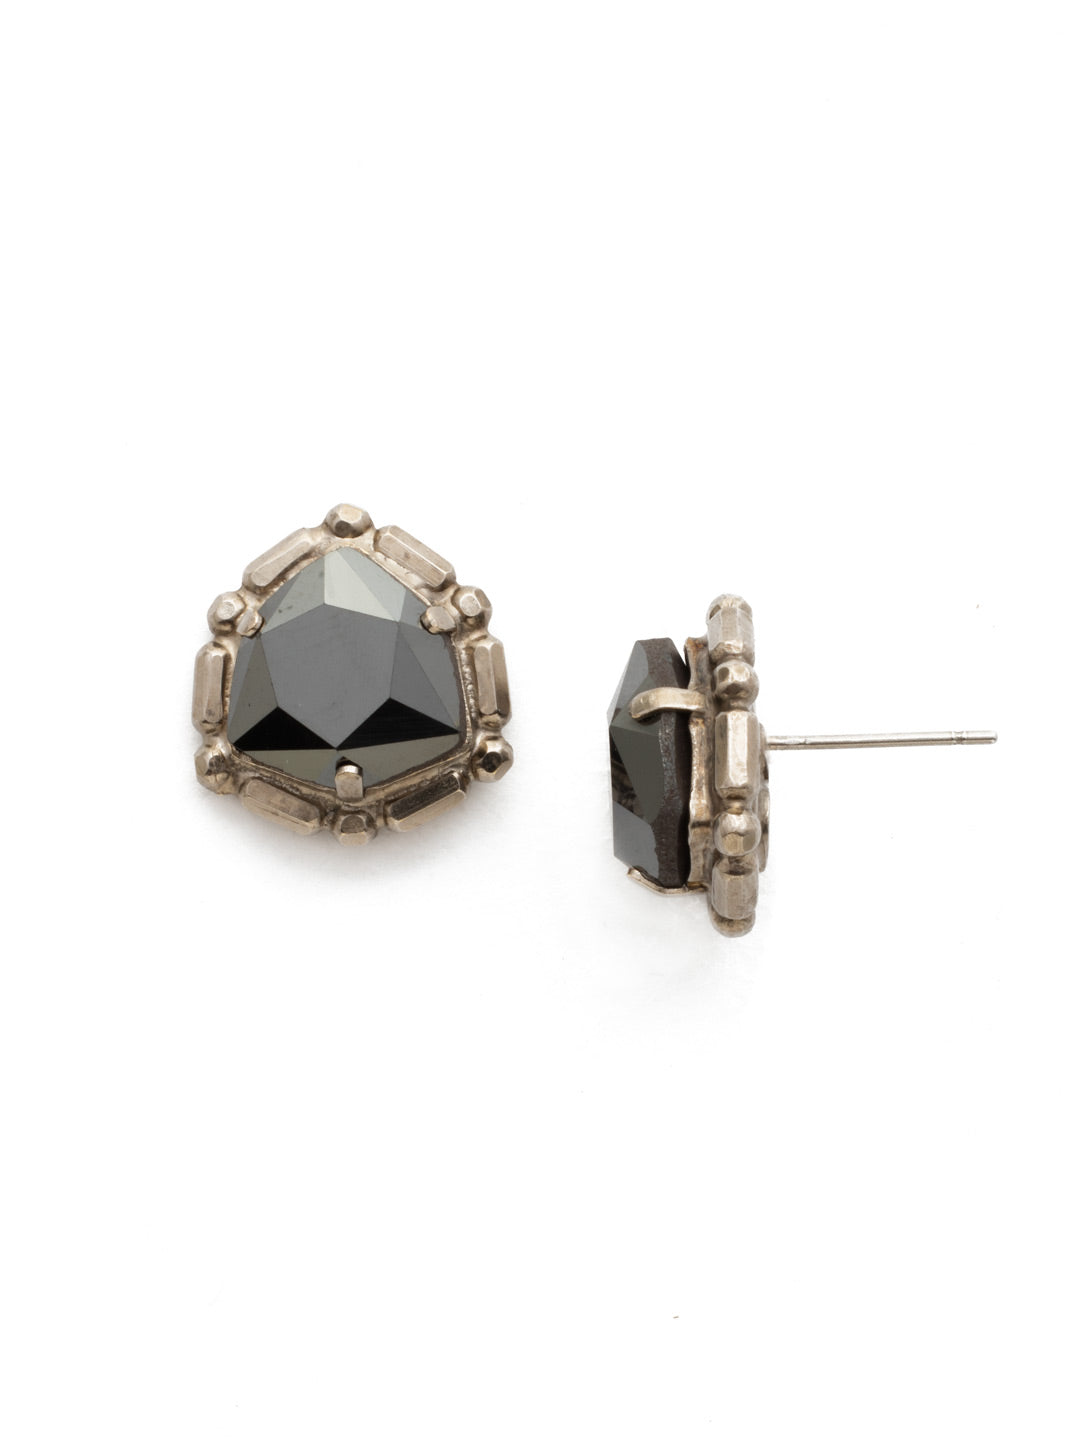 Primula Earring - EDX8ASBLT - A shield shaped crystal in a detailed metal setting. Perfect if you want to add just a bit of sparkle to any outfit! From Sorrelli's Black Tie collection in our Antique Silver-tone finish.